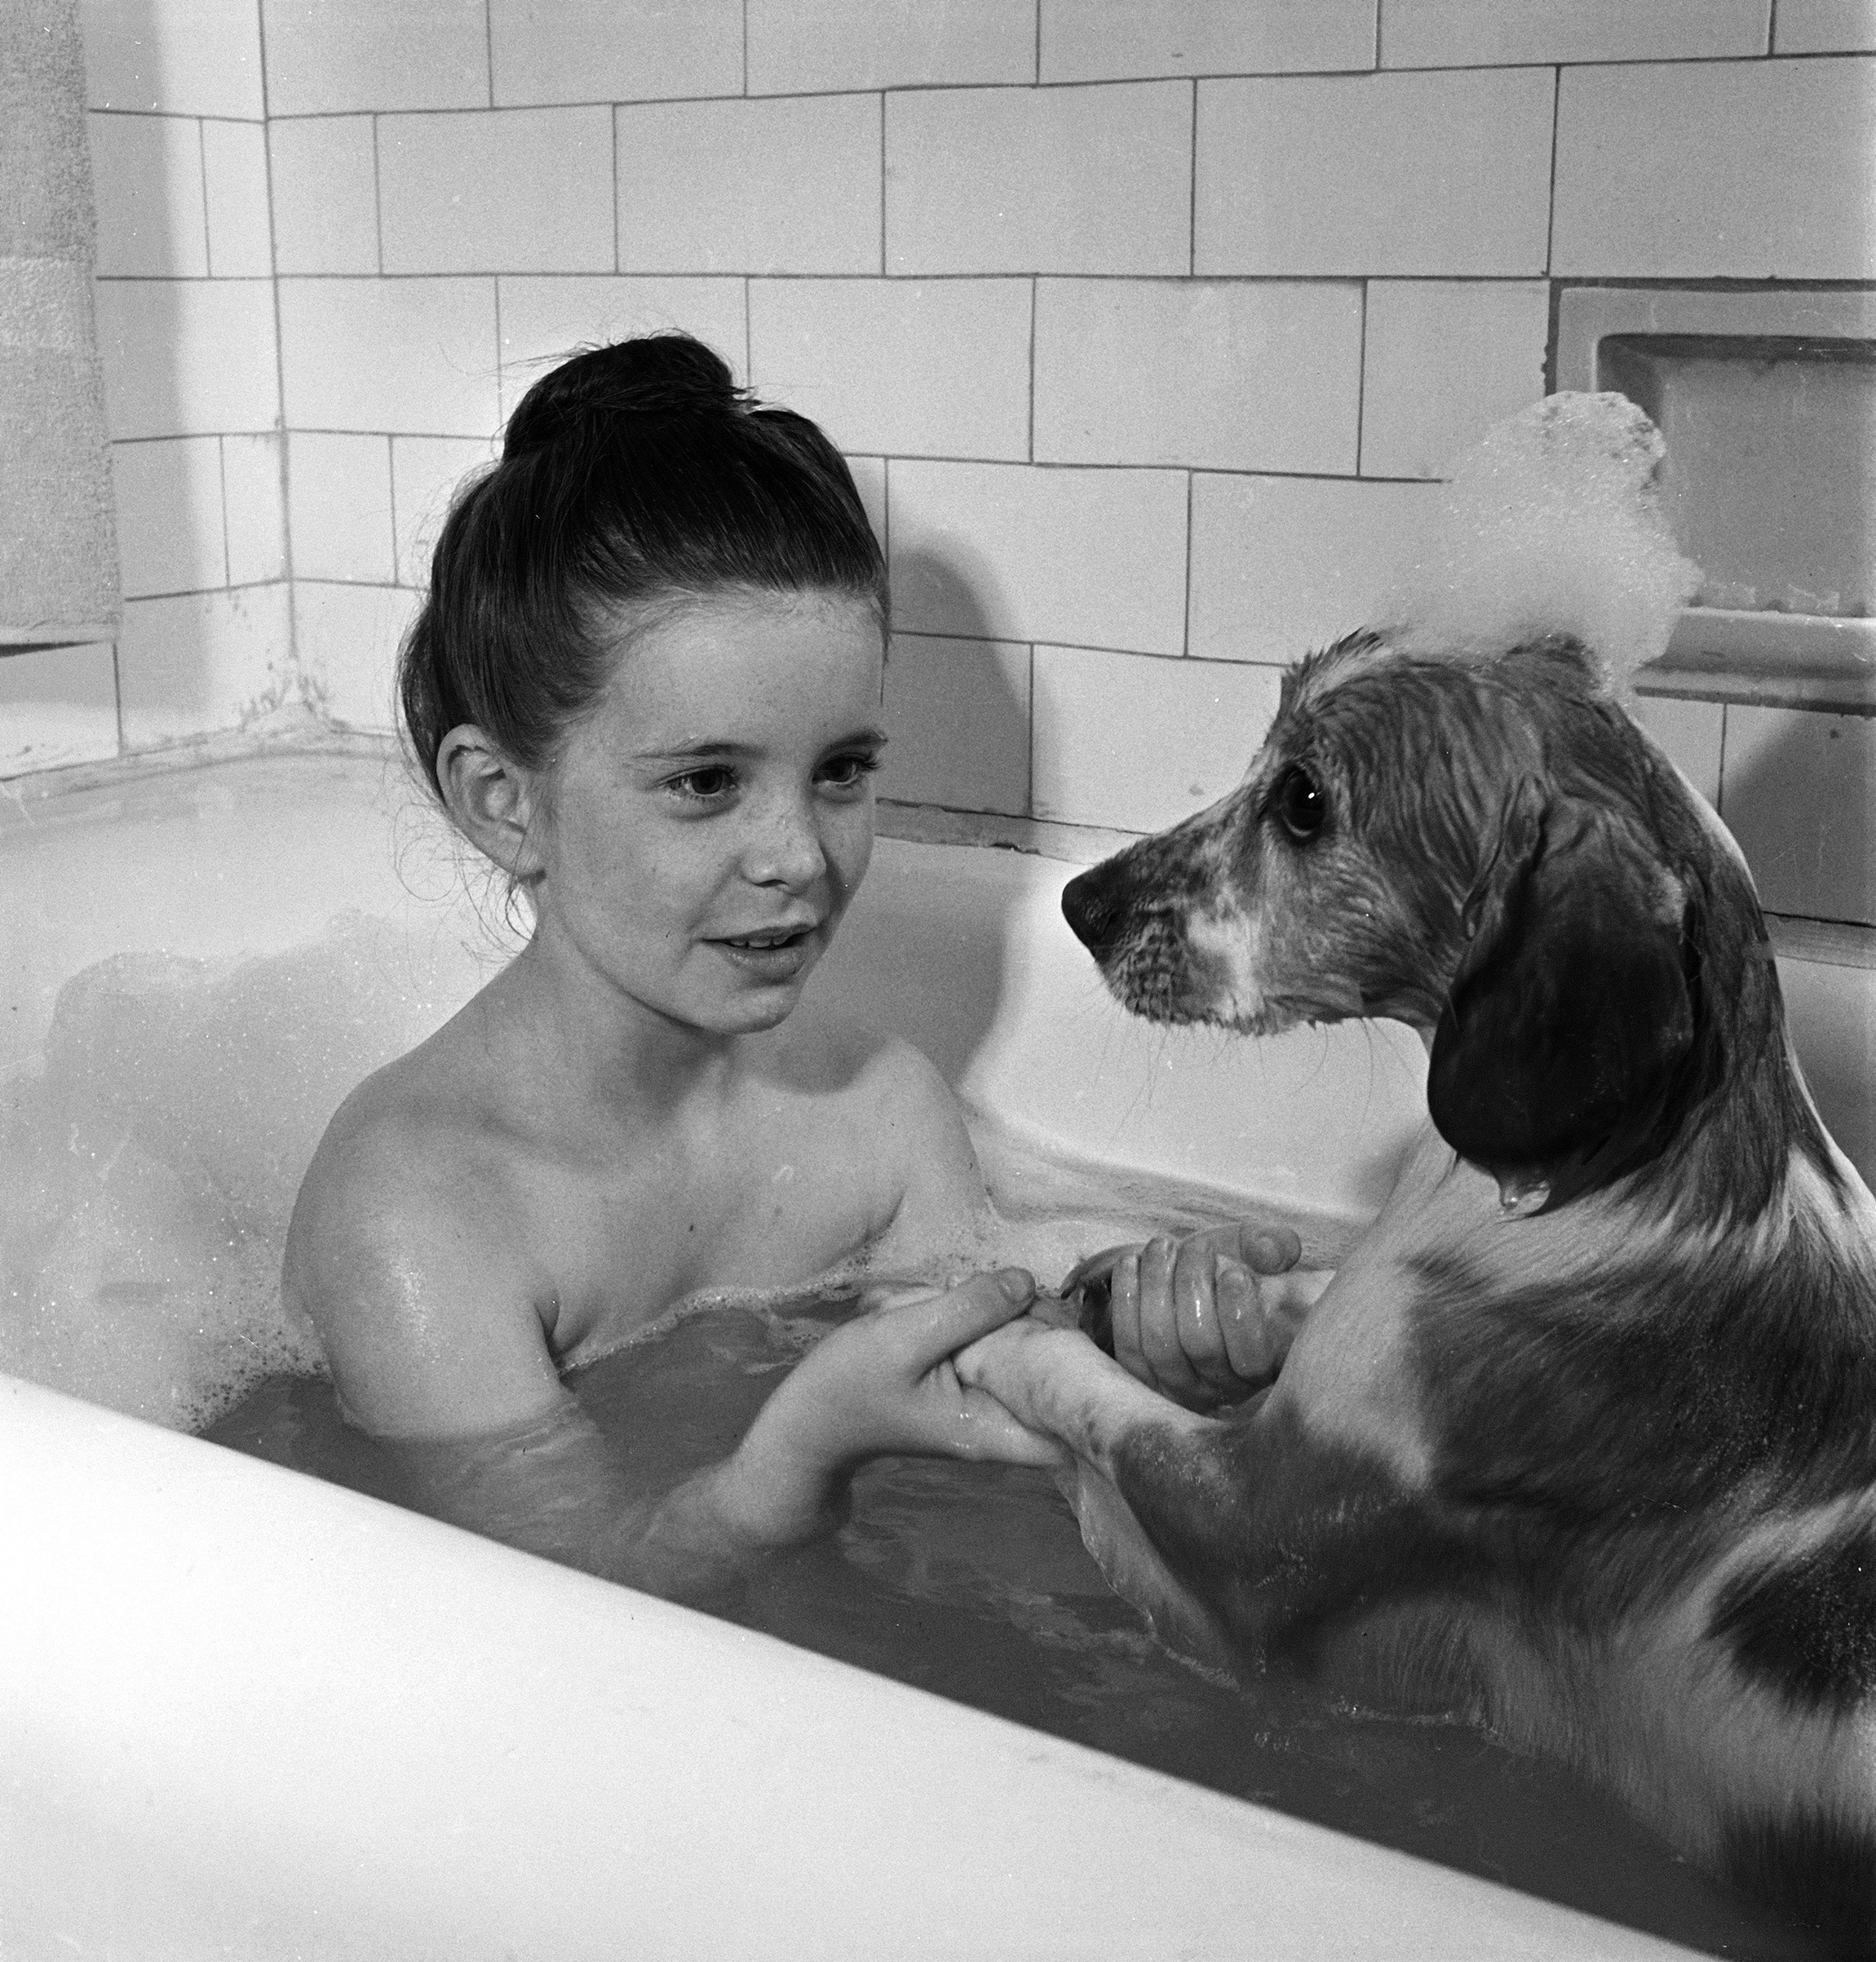 Child actress Margaret O'Brien and her spaniel pet Maggie sharing a bubble bath, Los Angeles, Calif., 1944.